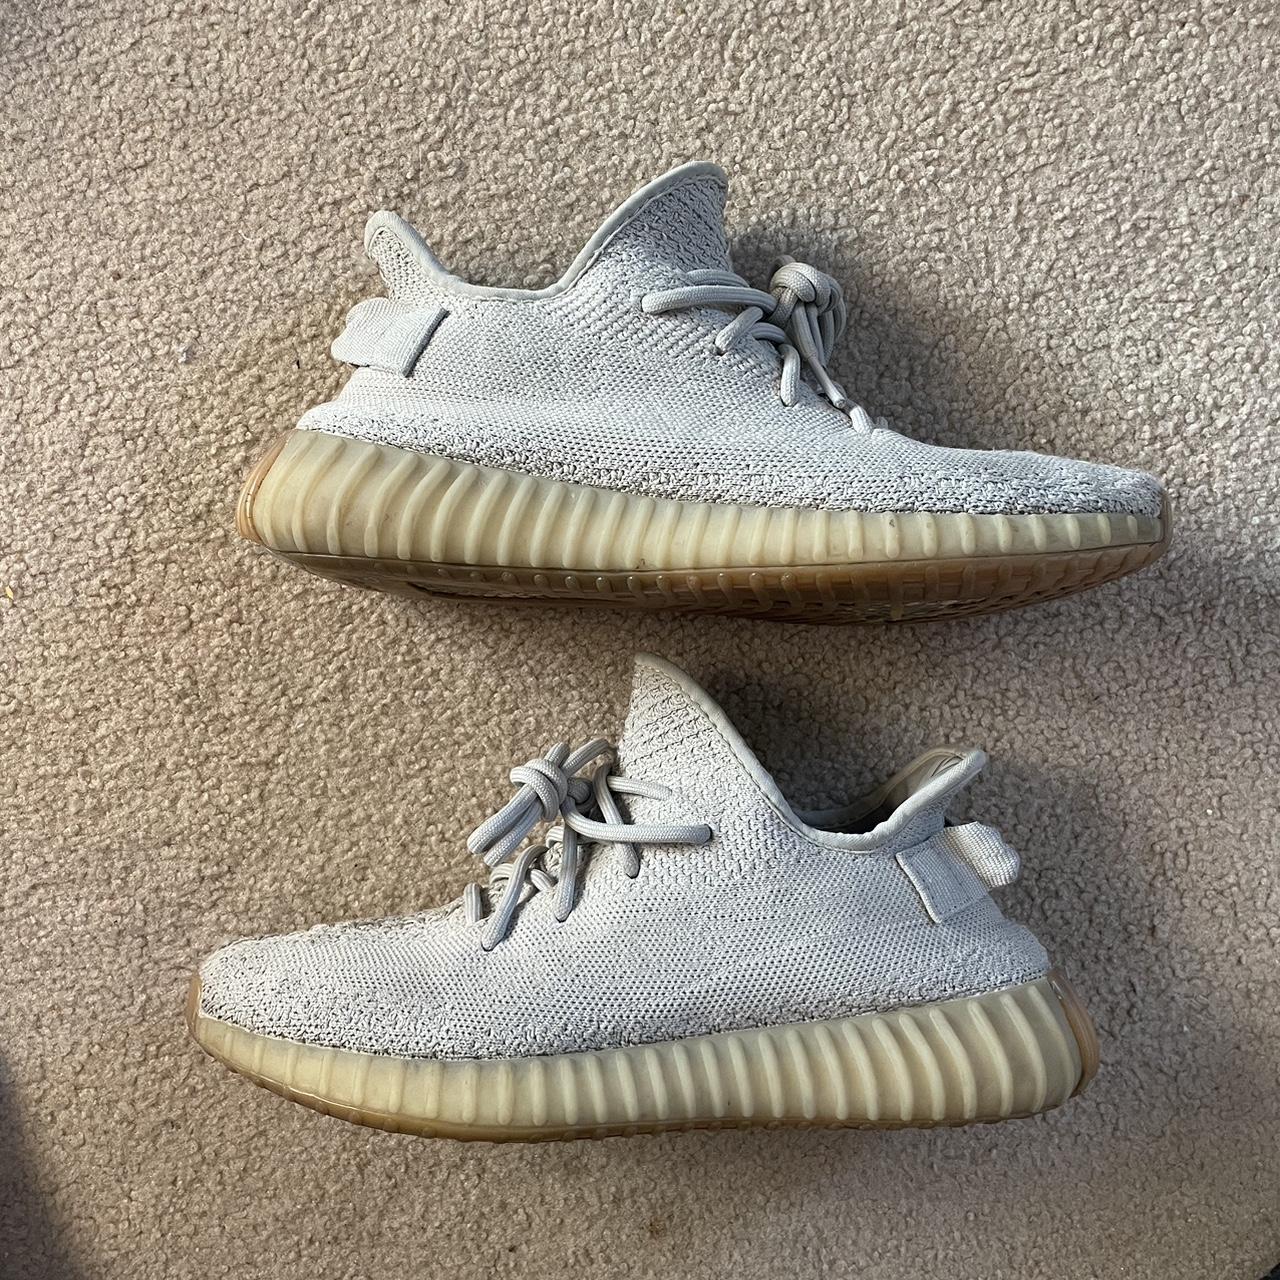 Yeezy Men's Tan and White Trainers (5)